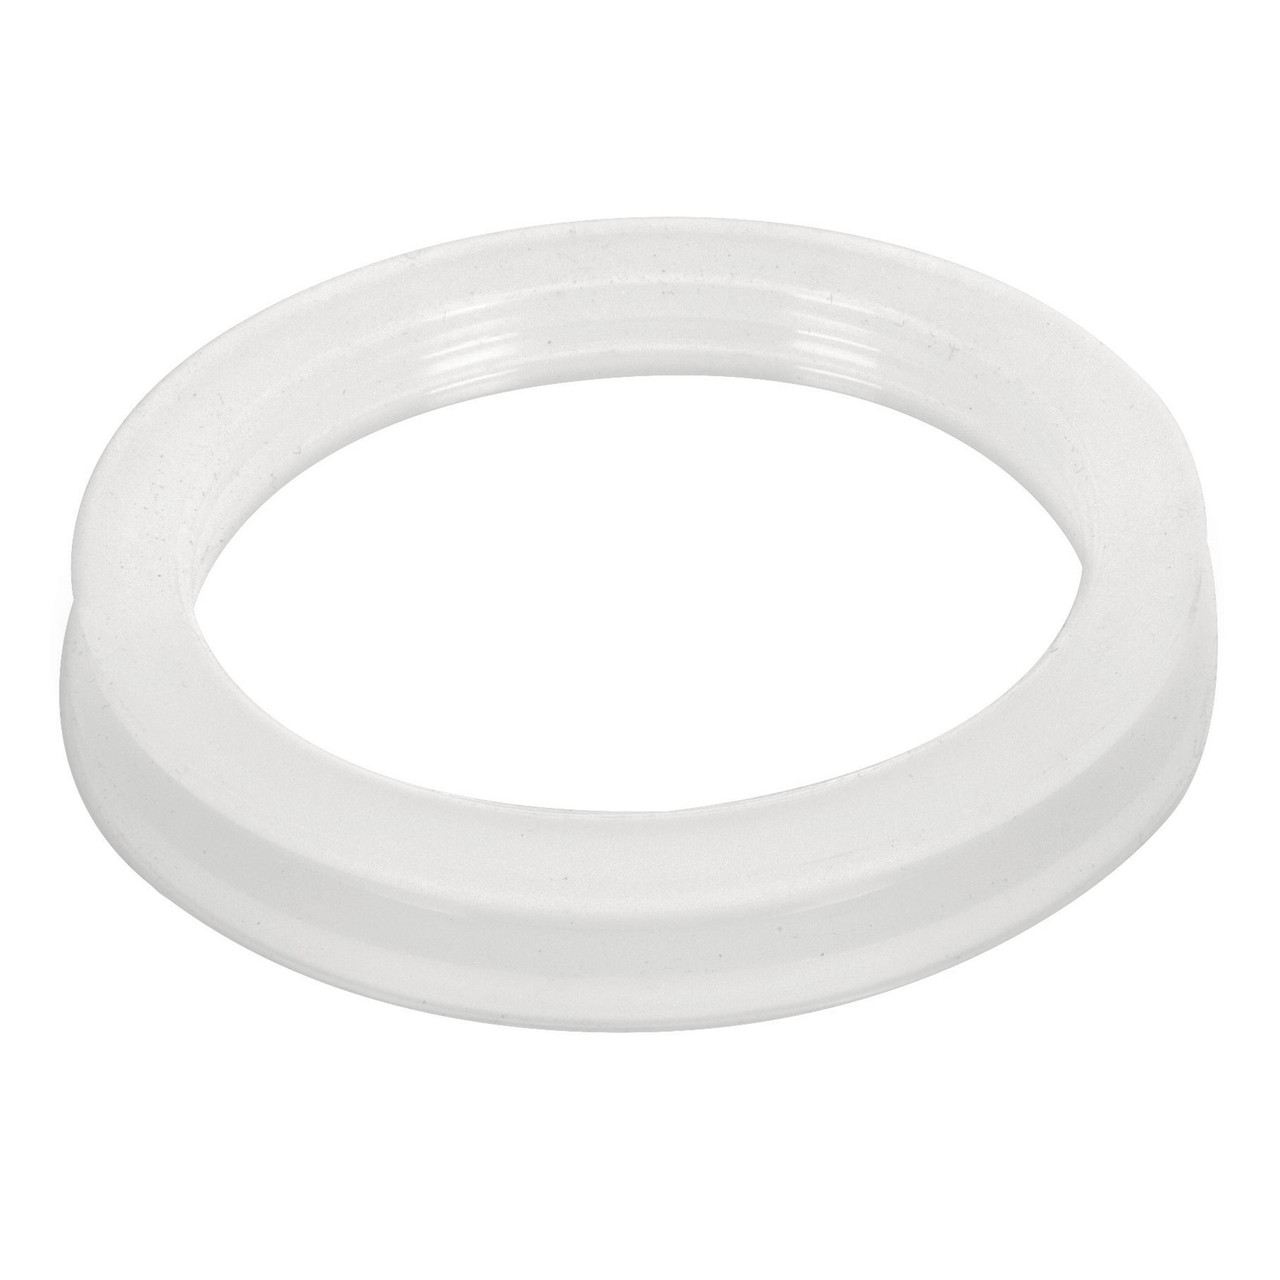 Foset Silicone Gasket for Solar Heater 2.3"